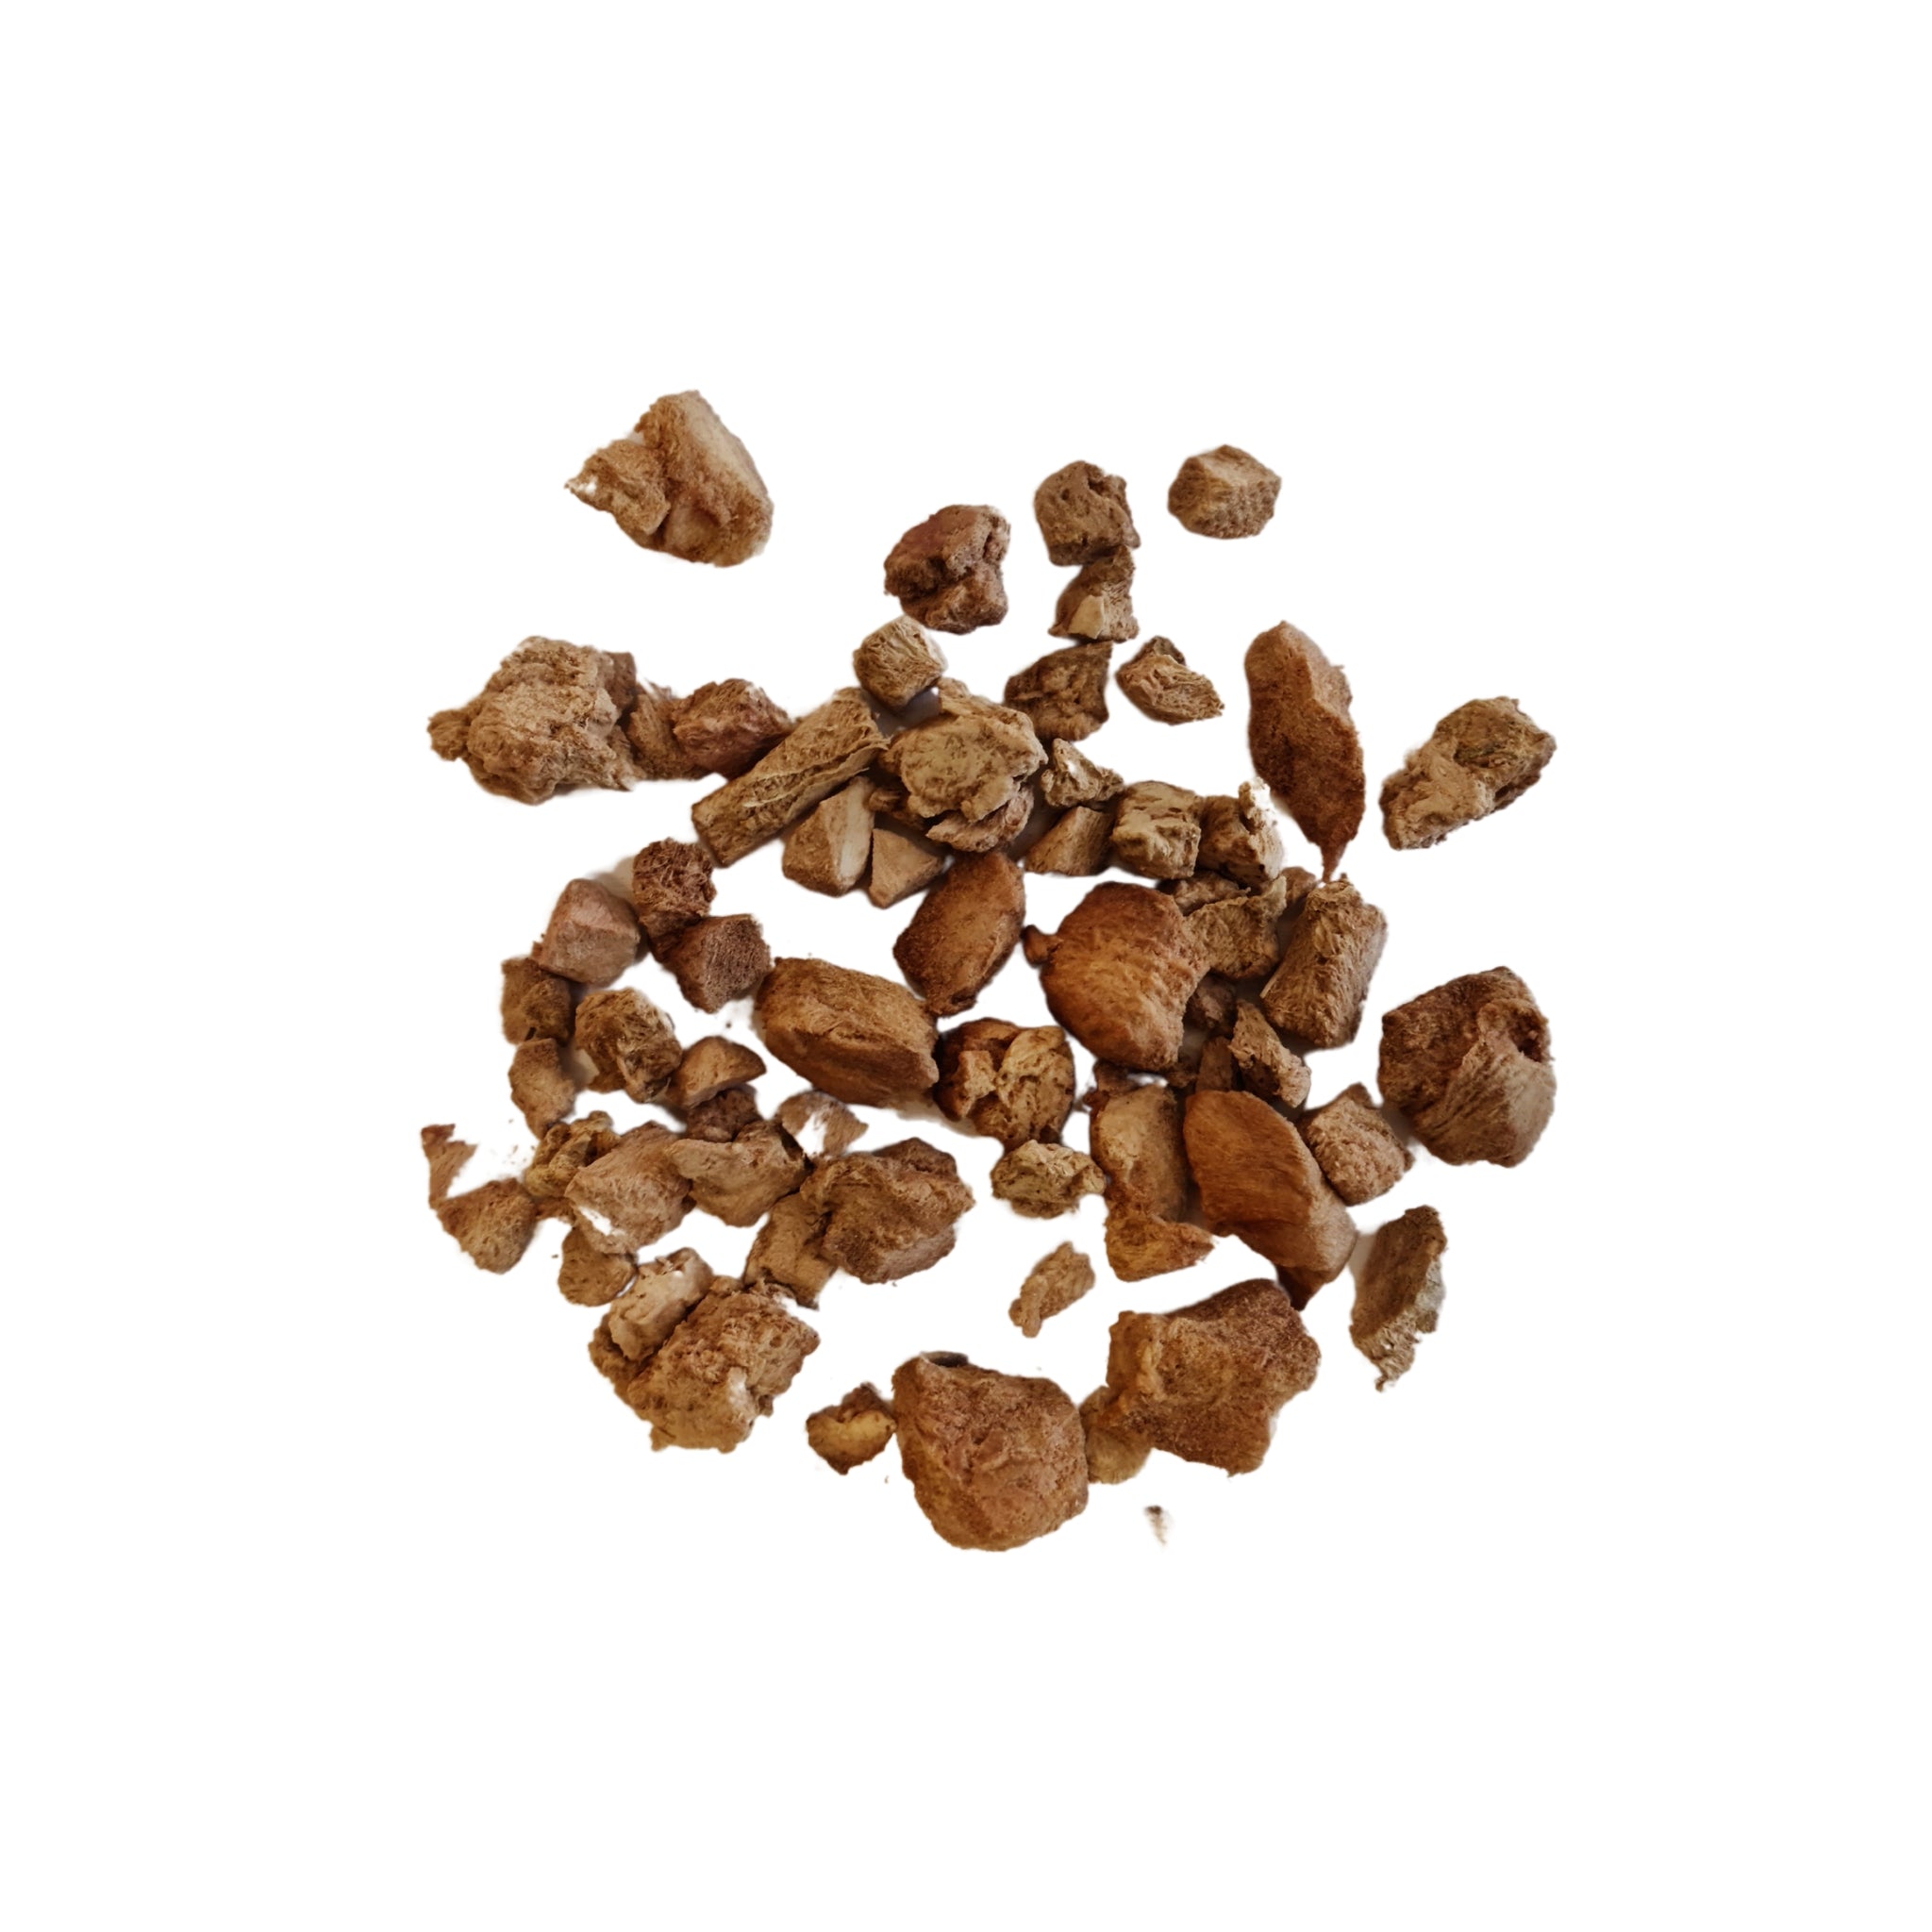 Pile of freeze dried Koi Carp treats for dogs and cats